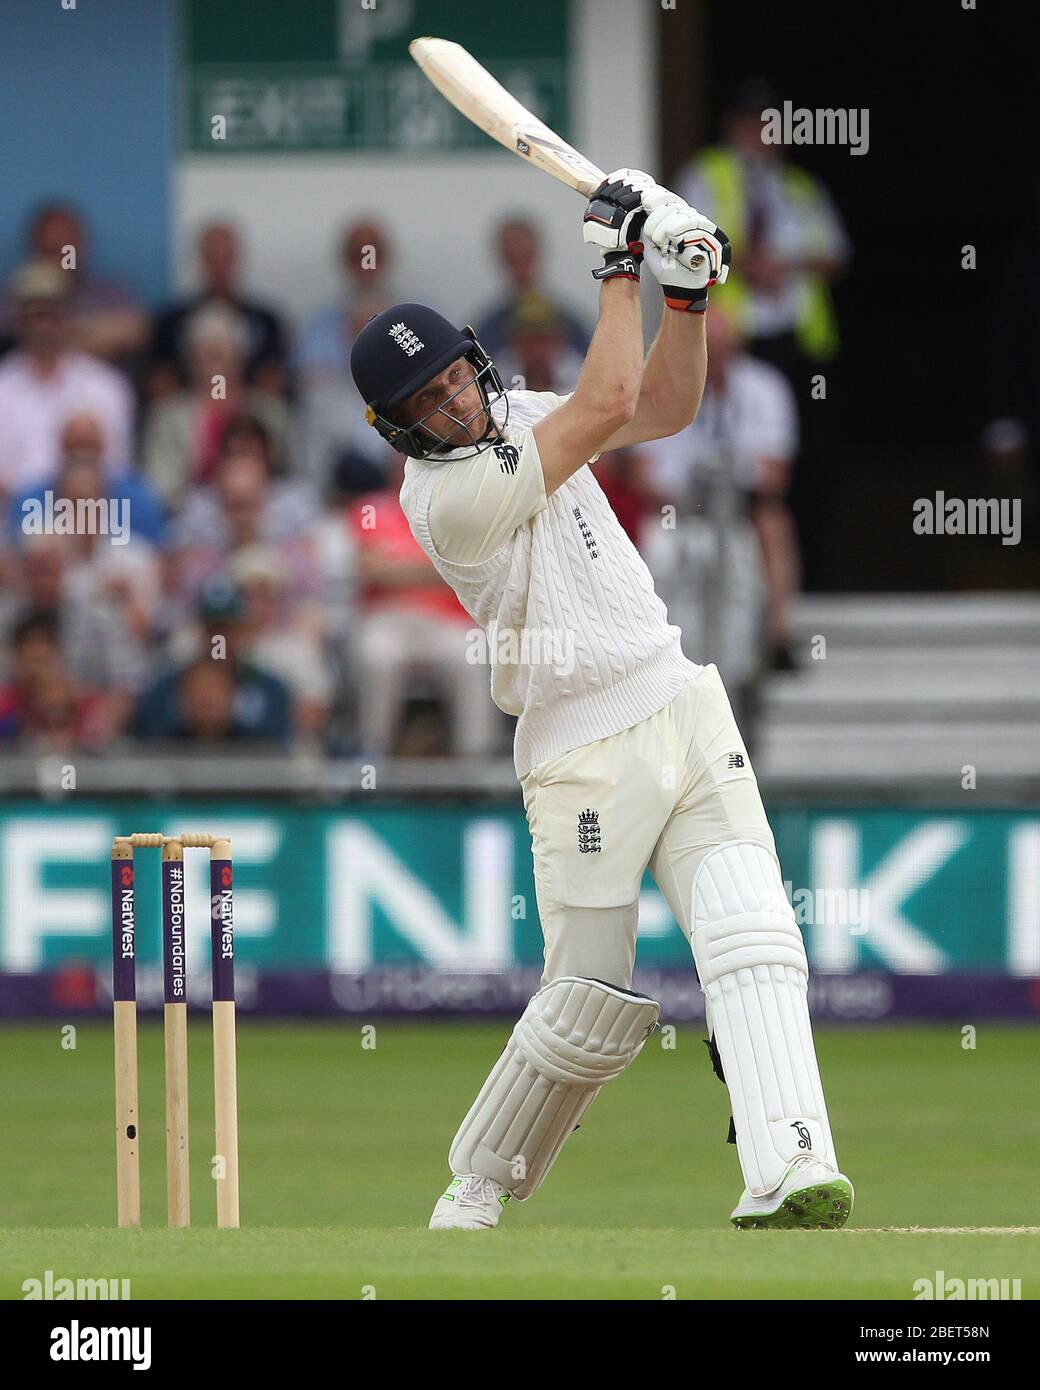 LEEDS, UK - JUNE 3rd Jos Buttler of England batting during the third day of the Second Nat West Test match between England and Pakistan at Headingley Cricket Ground, Leeds on Sunday 3rd June 2018. (Credit: Mark Fletcher | MI News) Stock Photo